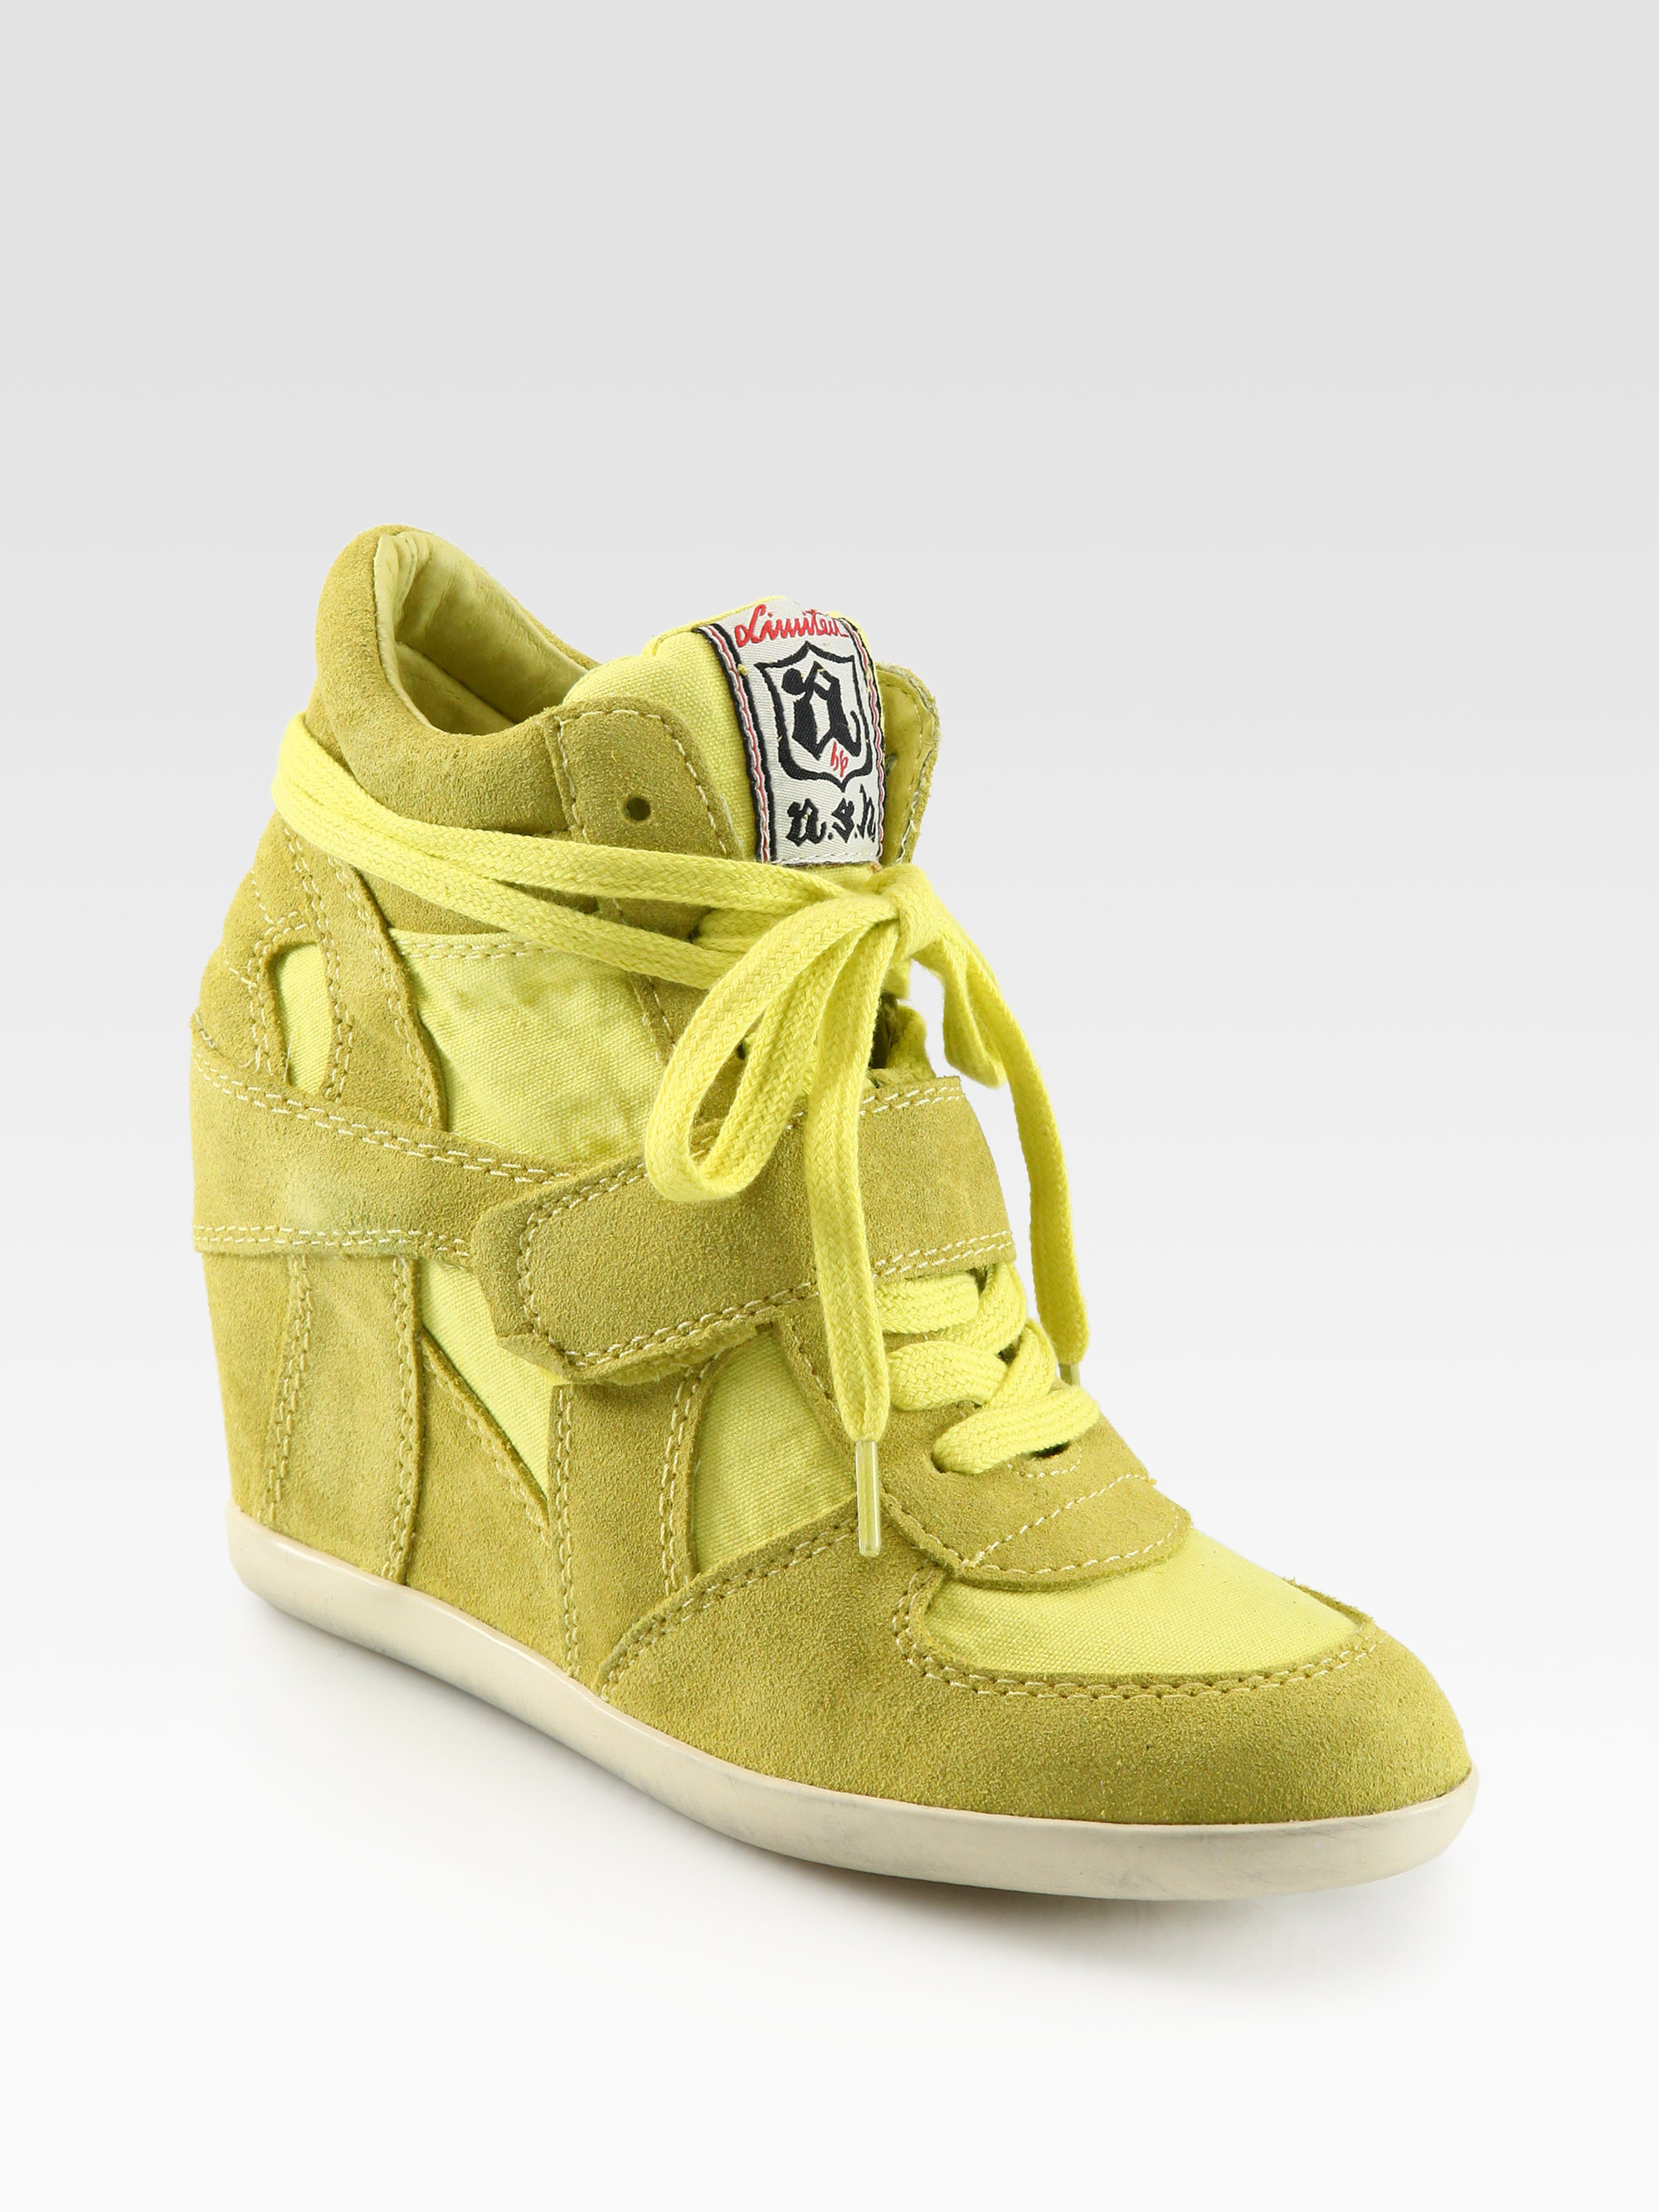 Ash Bowie Suede Canvas Wedge Sneakers in Yellow (lemon) | Lyst